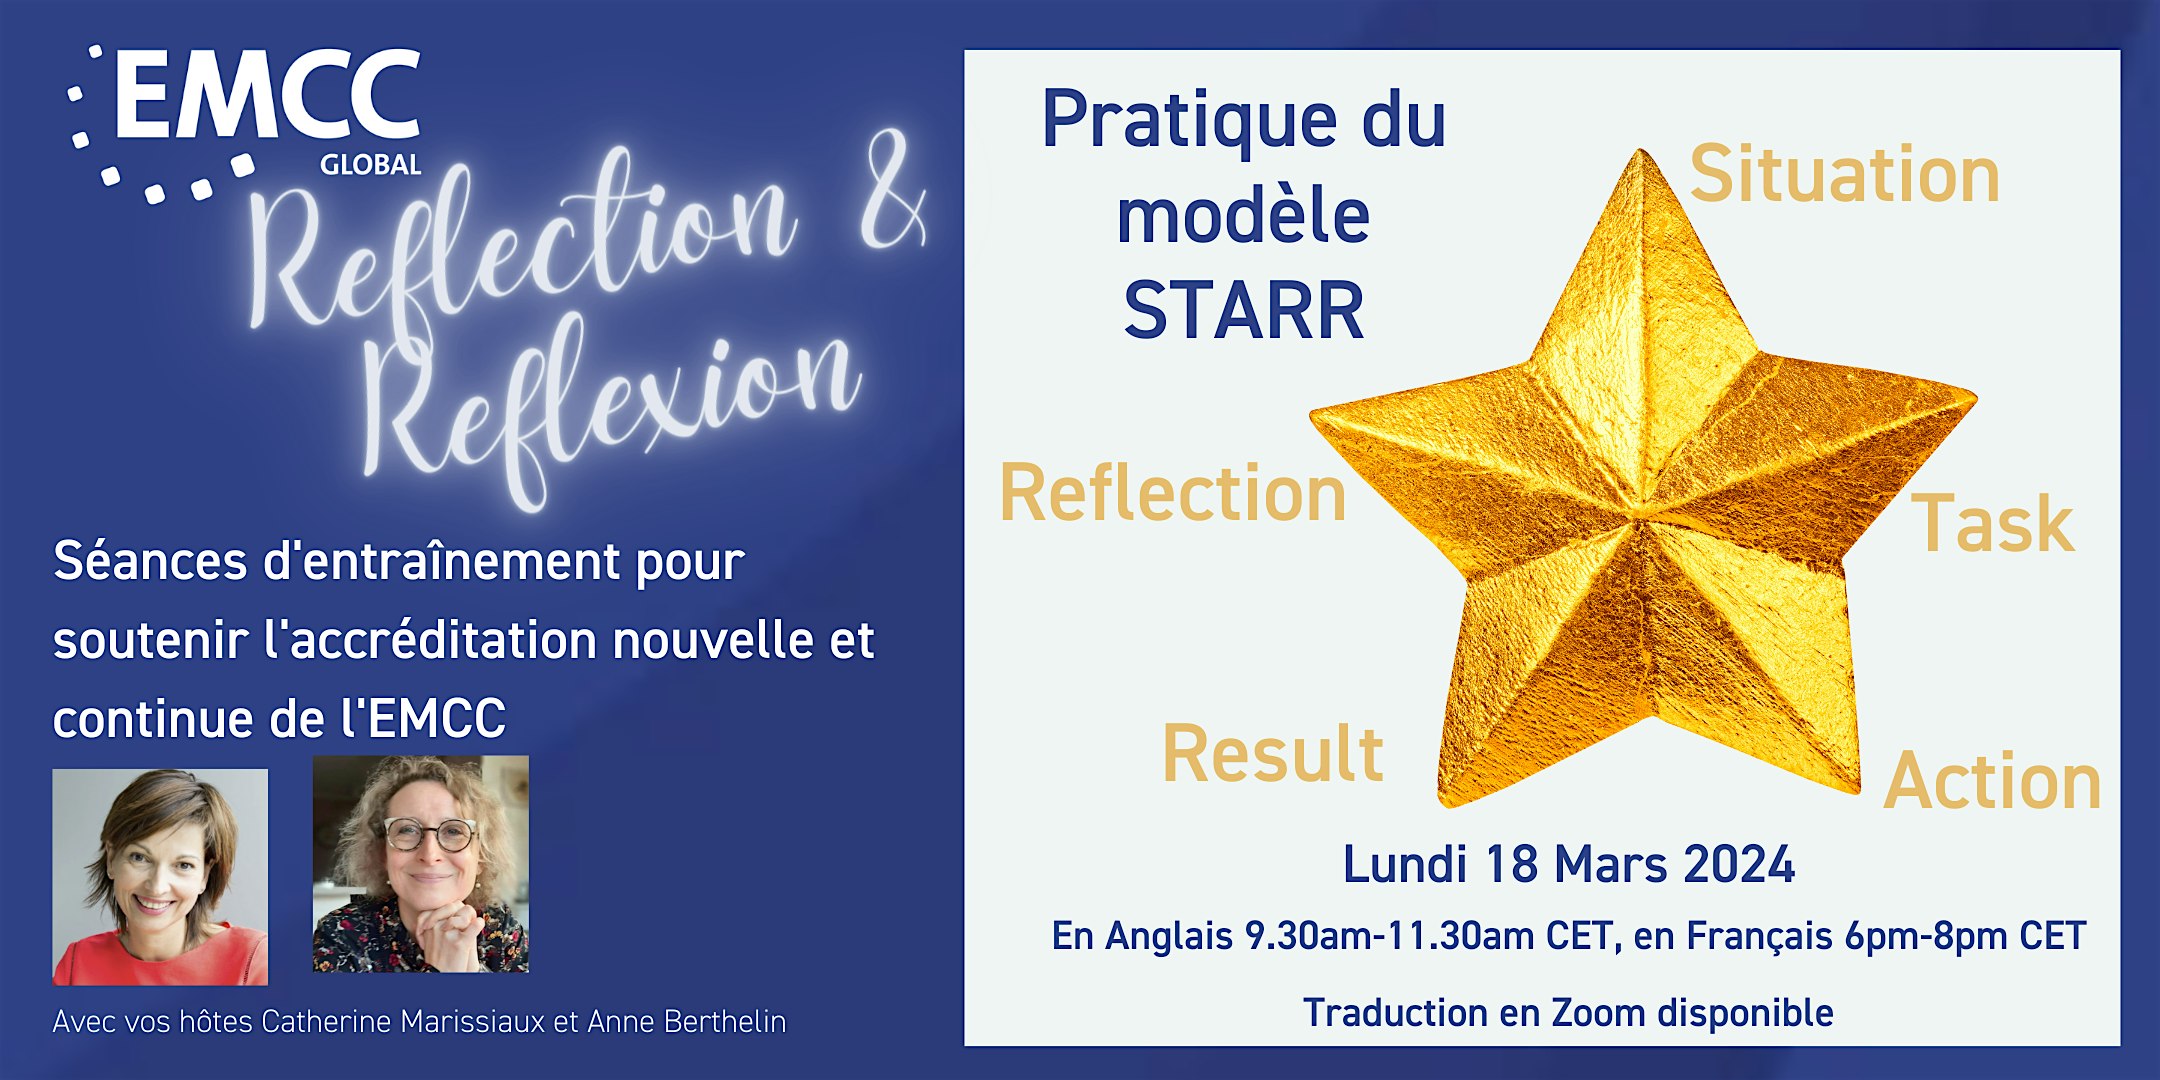 Reflection & Reflexion: STARR model, in French language